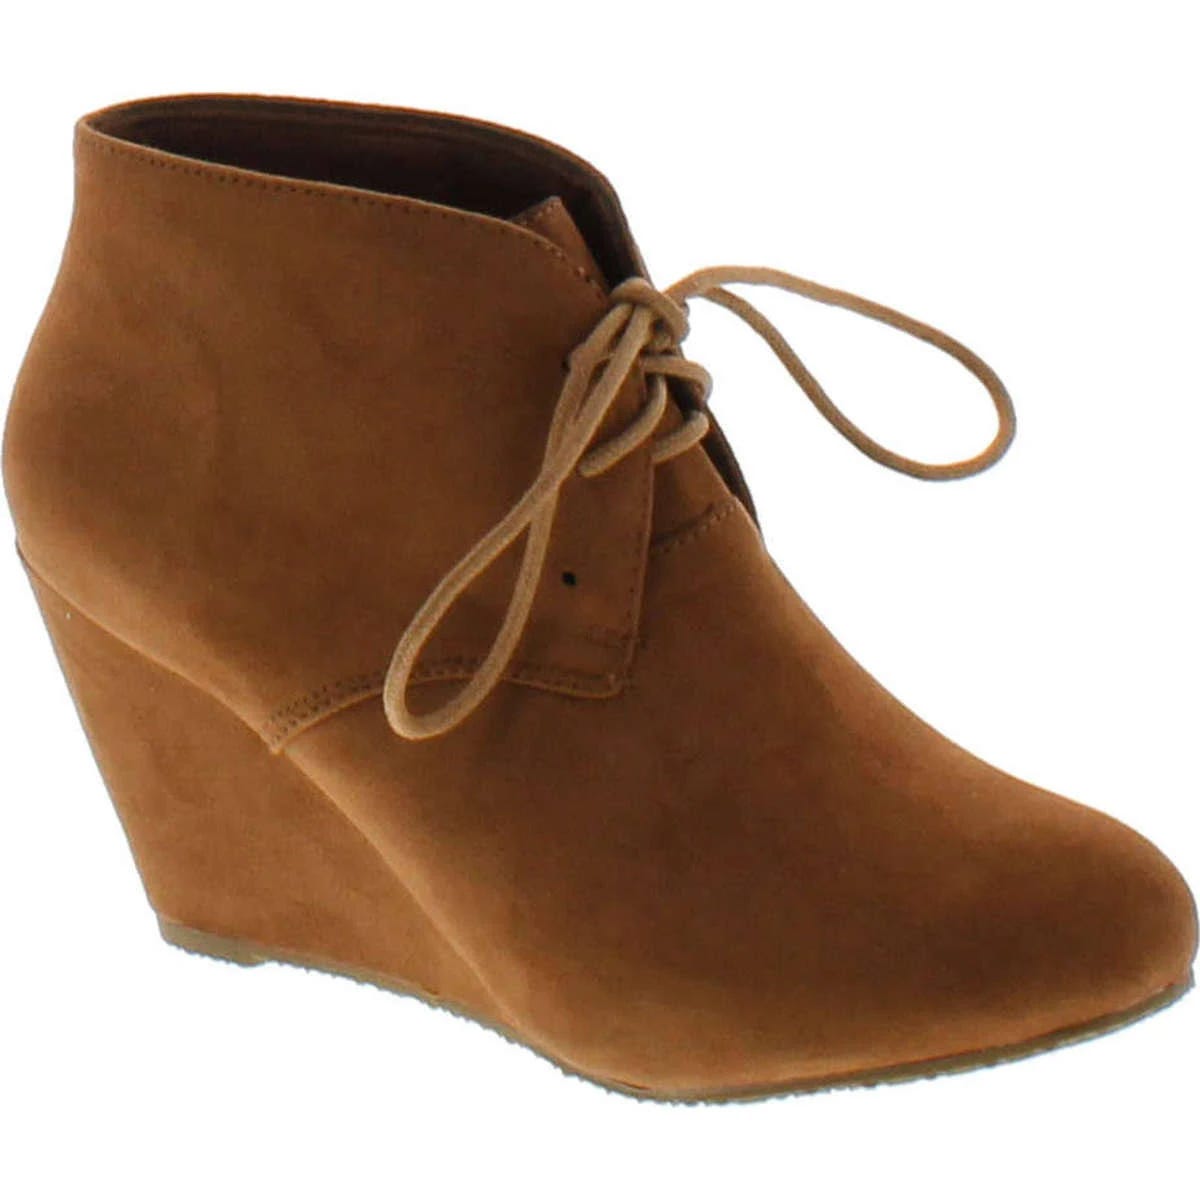 Anna Sally-5 Women's Almond Toe Lace-Up Wedge Ankle Booties in Camel | Image